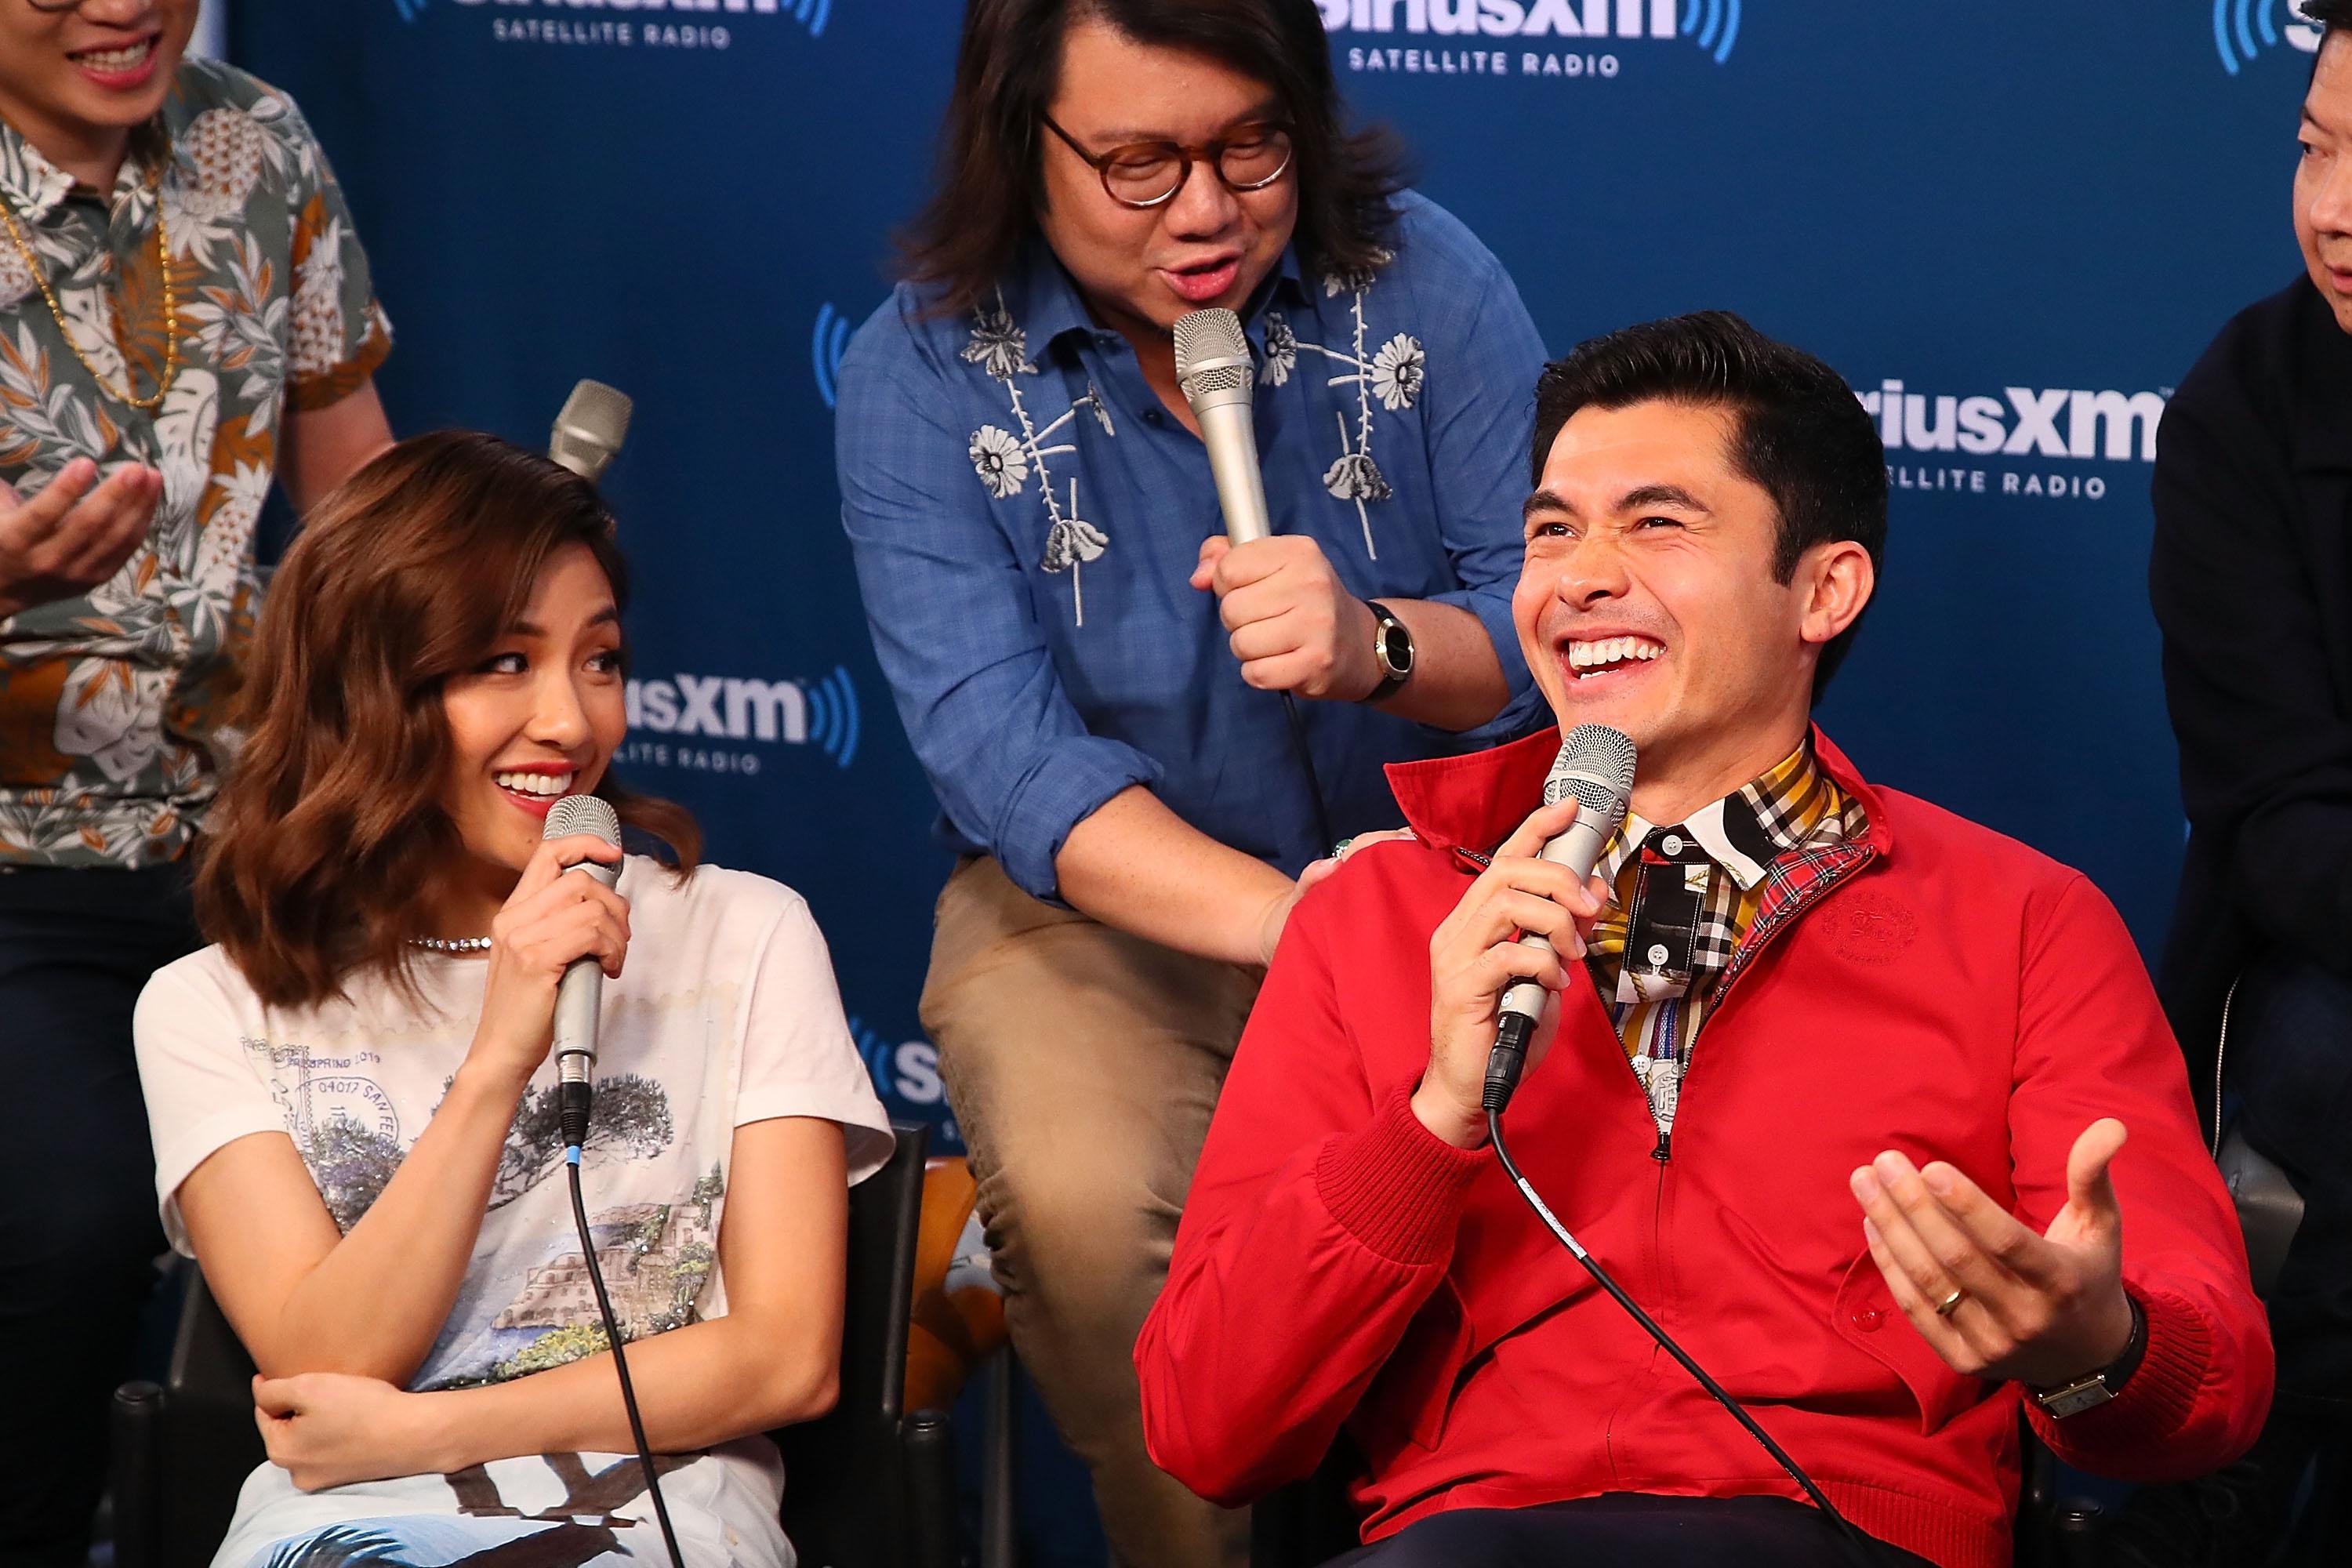 The cast of Crazy Rich Asians talks into microphones for a radio show.